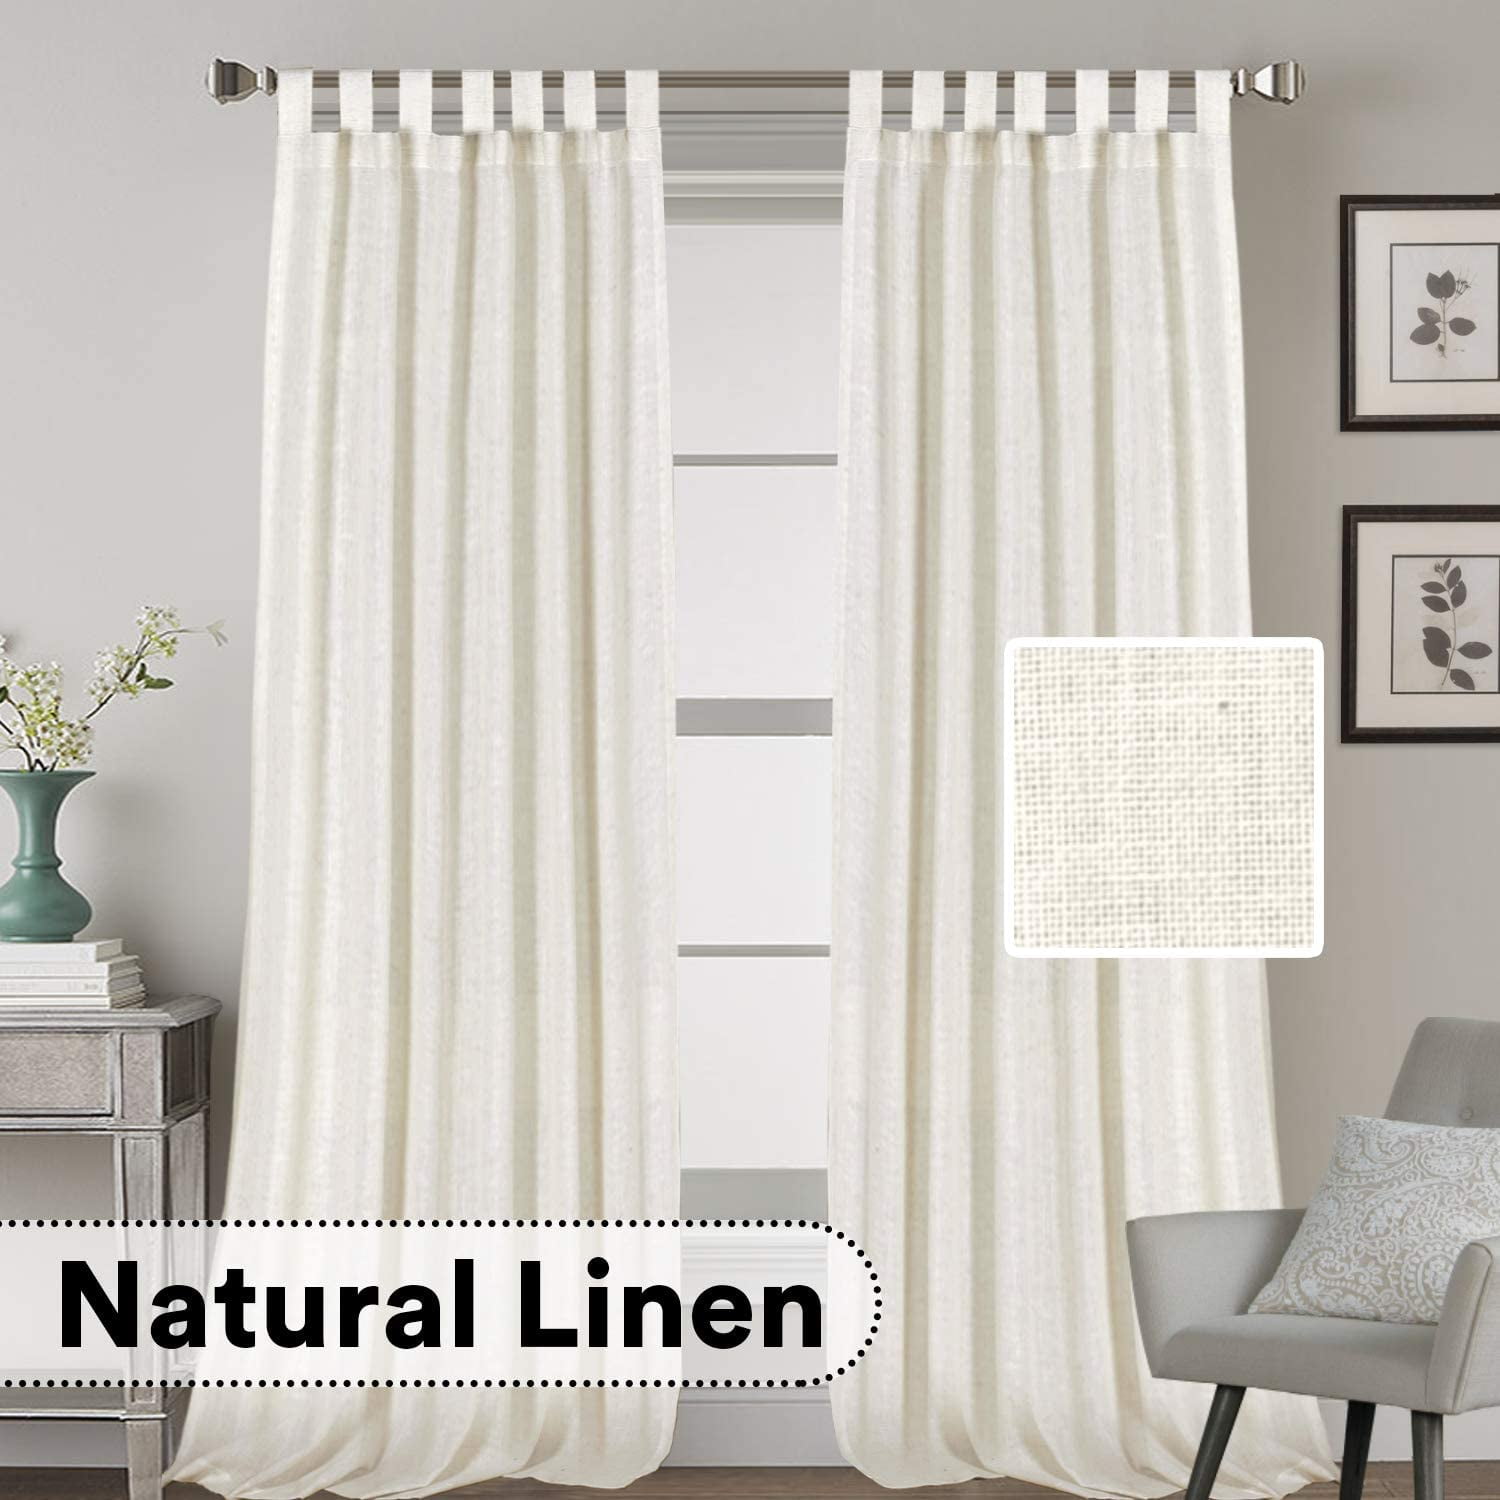 Tab Top Curtain Set Natural 2 Pack Ultra Luxurious High Woven Linen Elegant Curtain Panels Light Reducing Privacy Panels Drapes Extra Long 52x108-Inch 